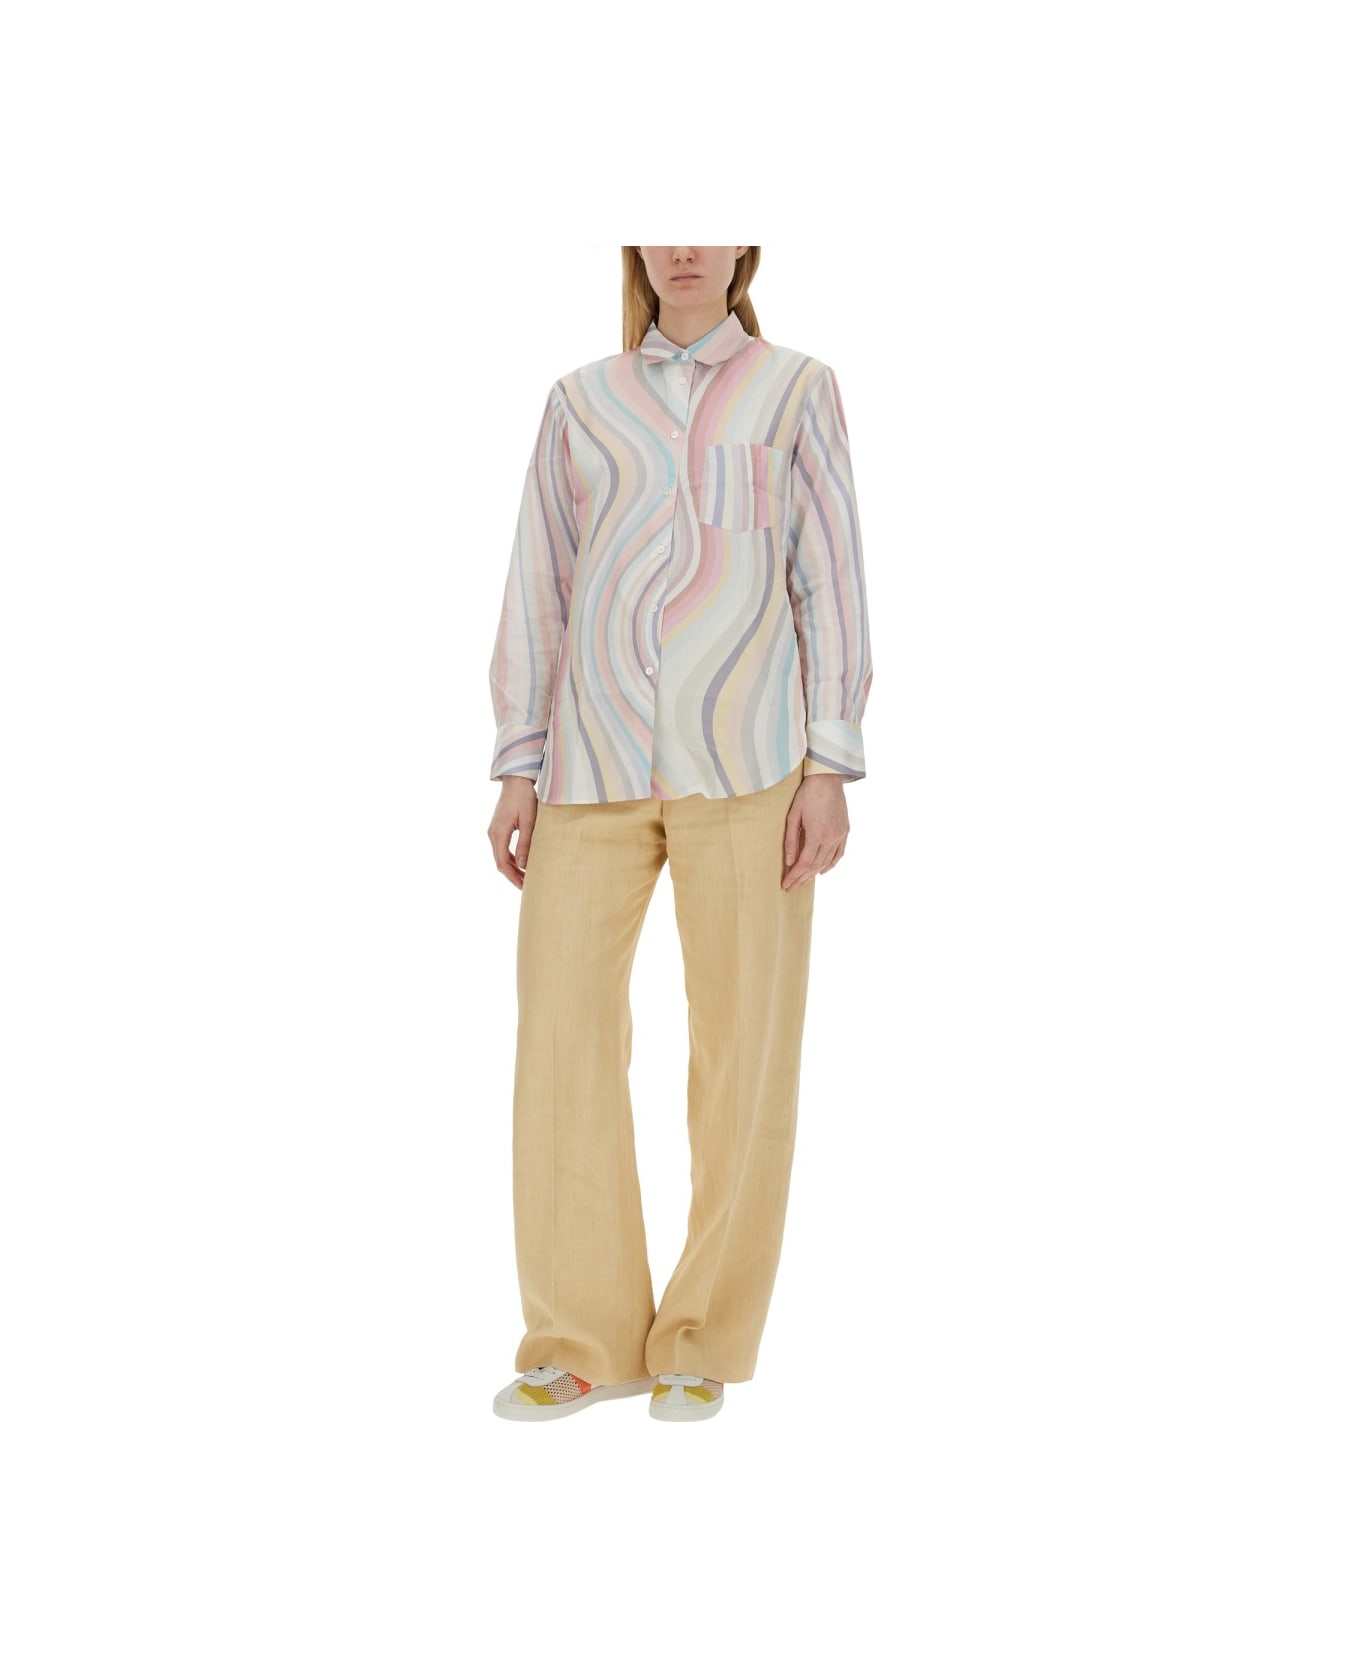 PS by Paul Smith "faded Swirl" Shirt - MULTICOLOUR